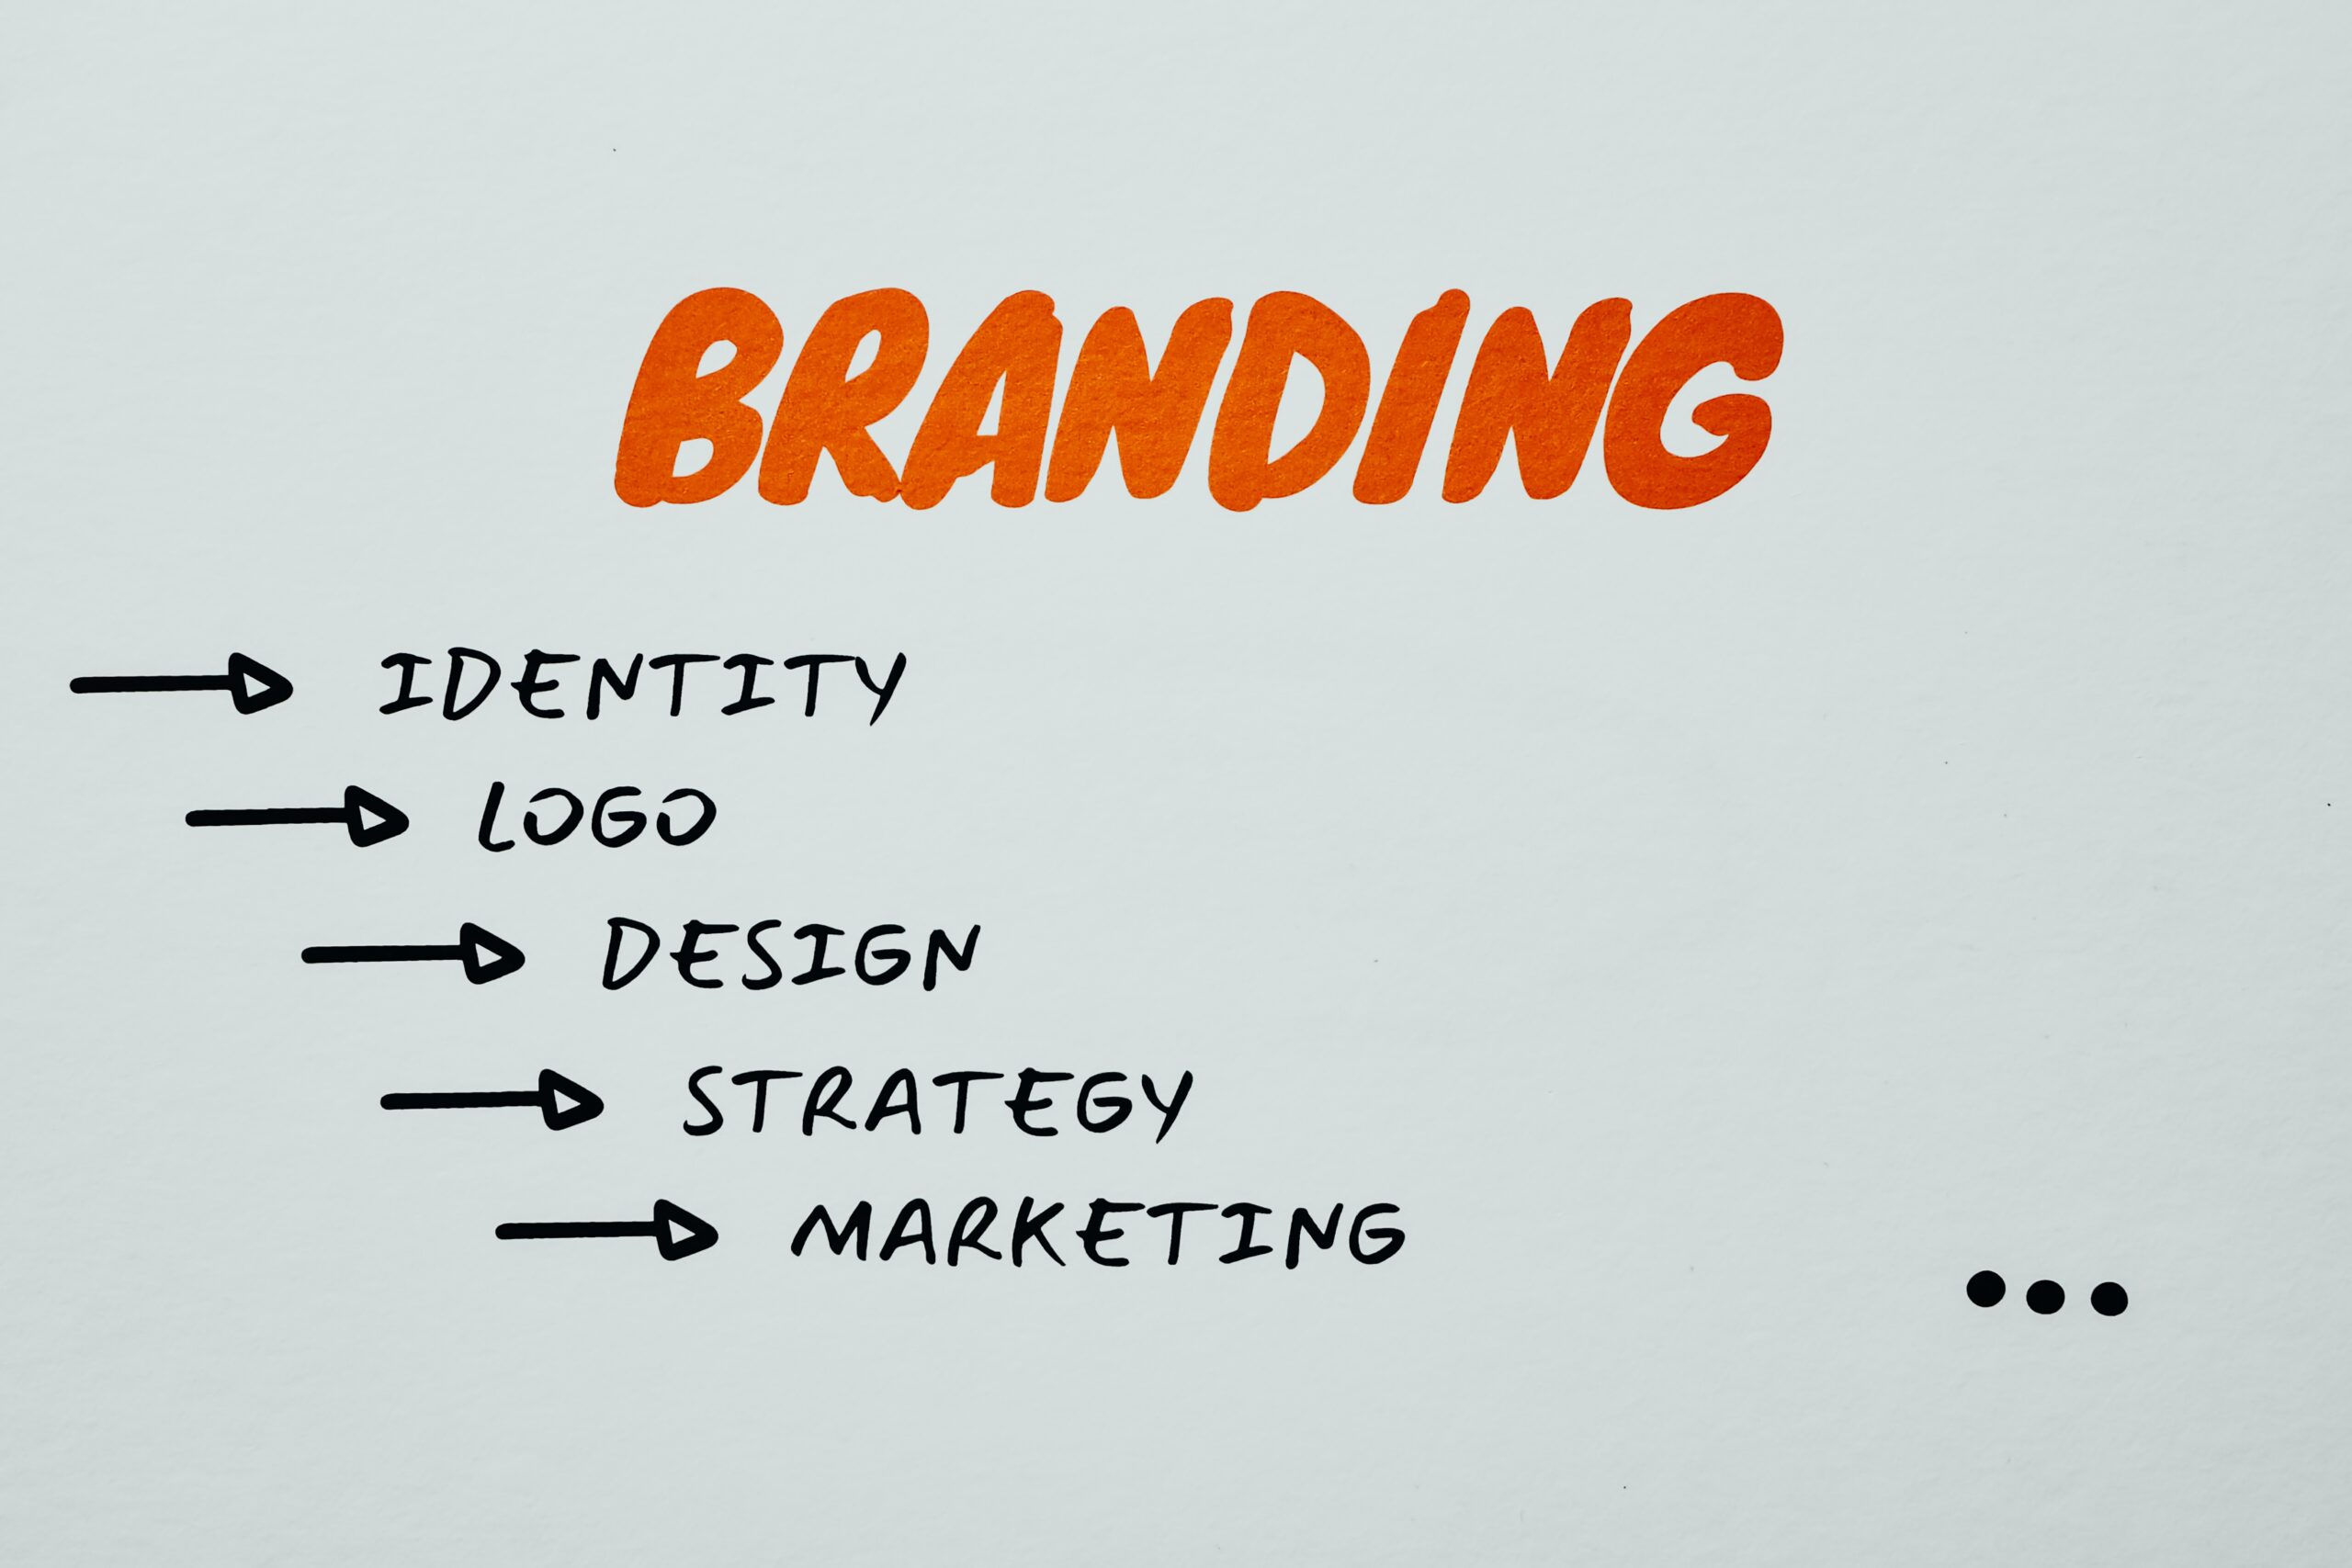 Picture showing personal branding